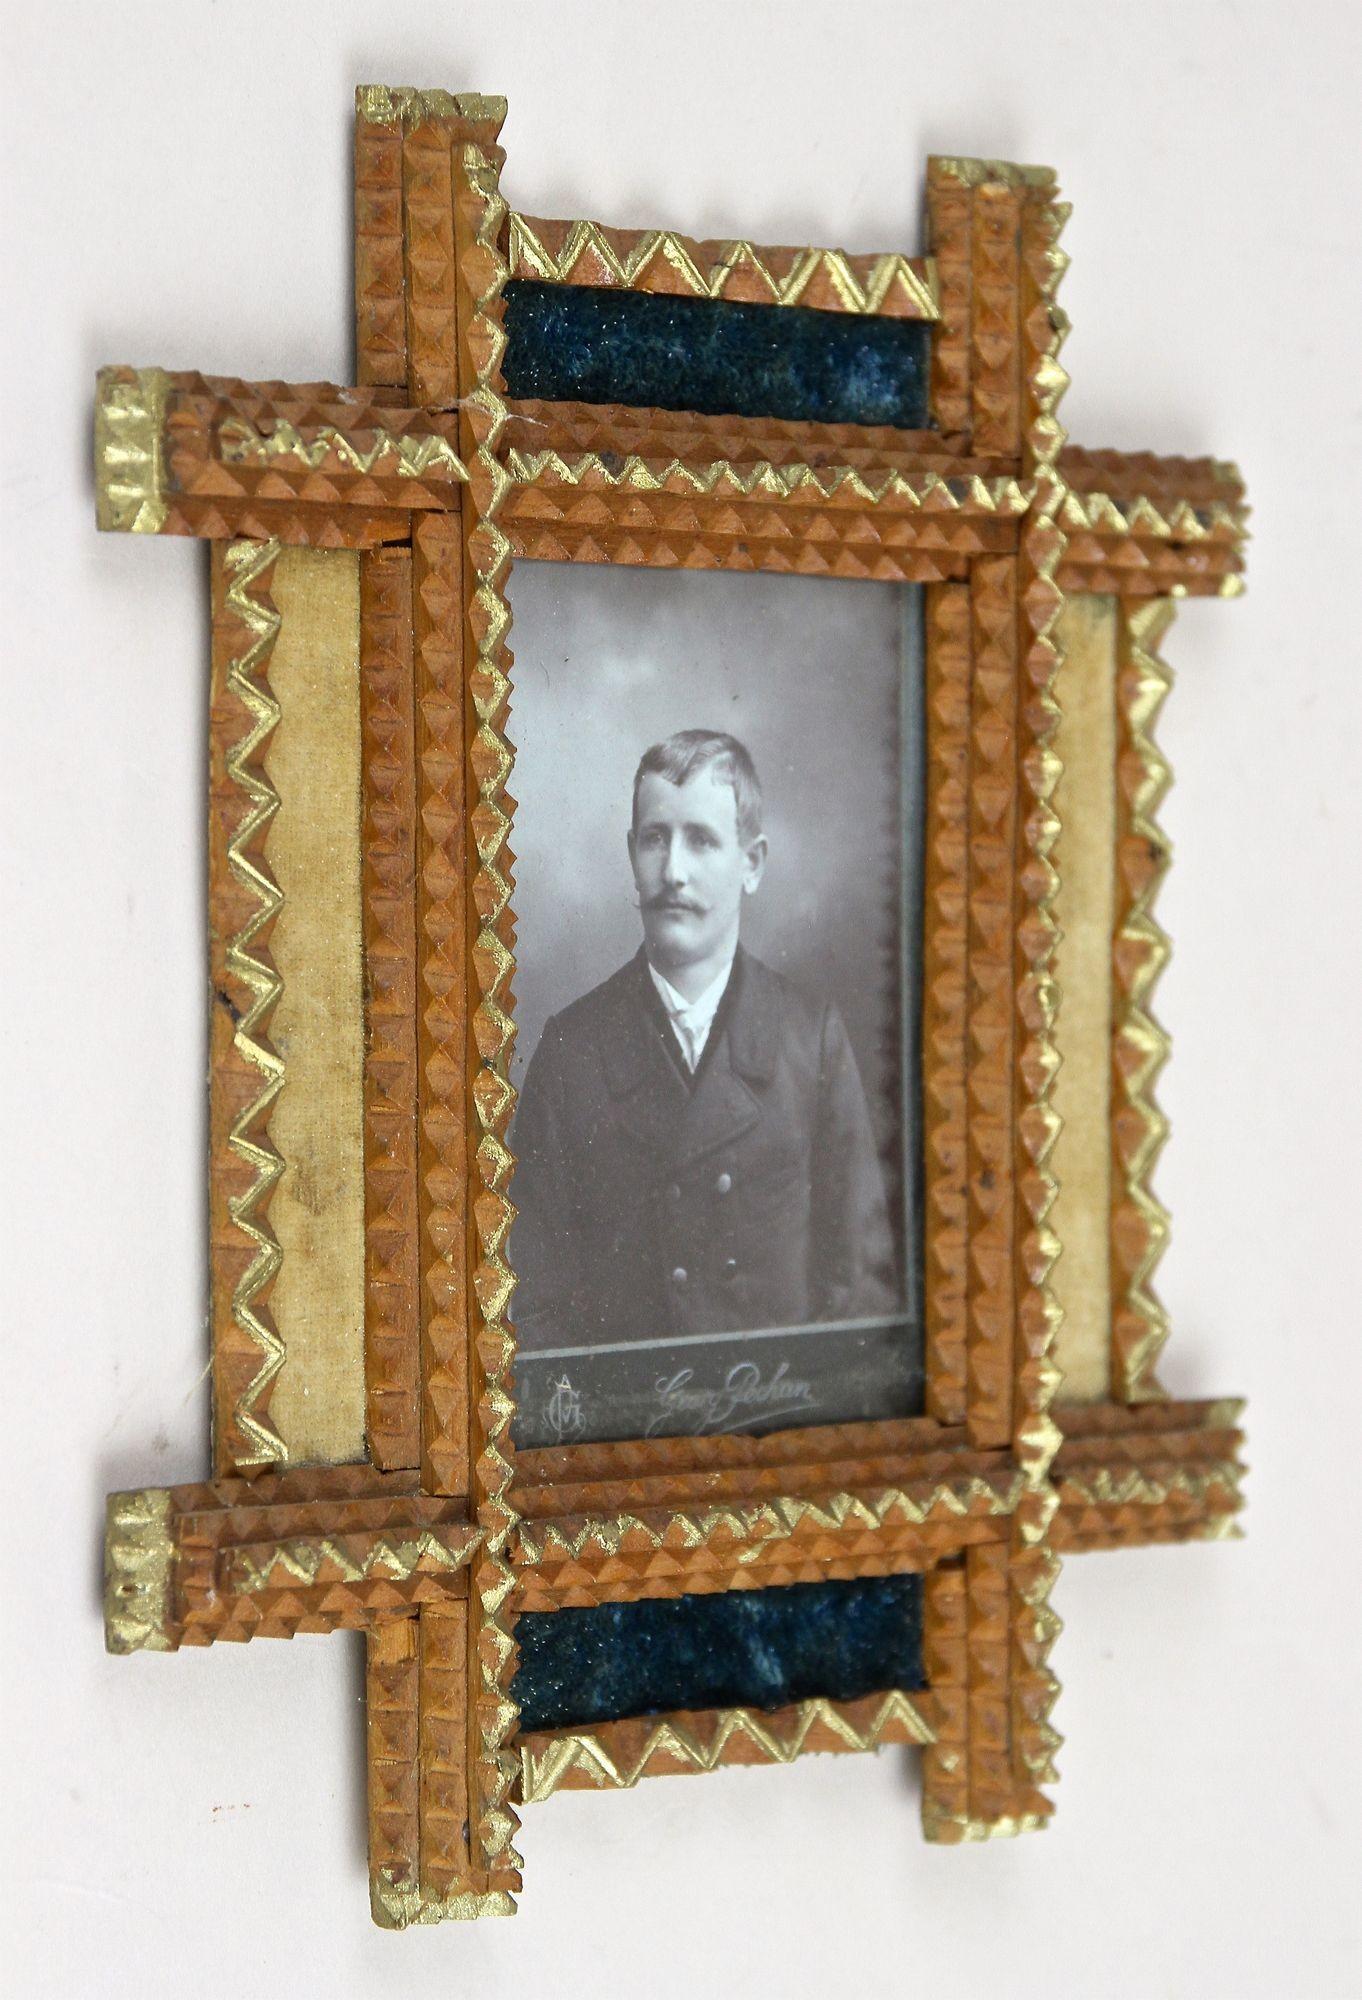 Extrordinary Tramp Art photo frame from the period in Austria around 1890. Elaborately hand carved out of bass this antique rustic photo frame impresses with an unusual doubled frame: the beautiful inner section shows the so-called 